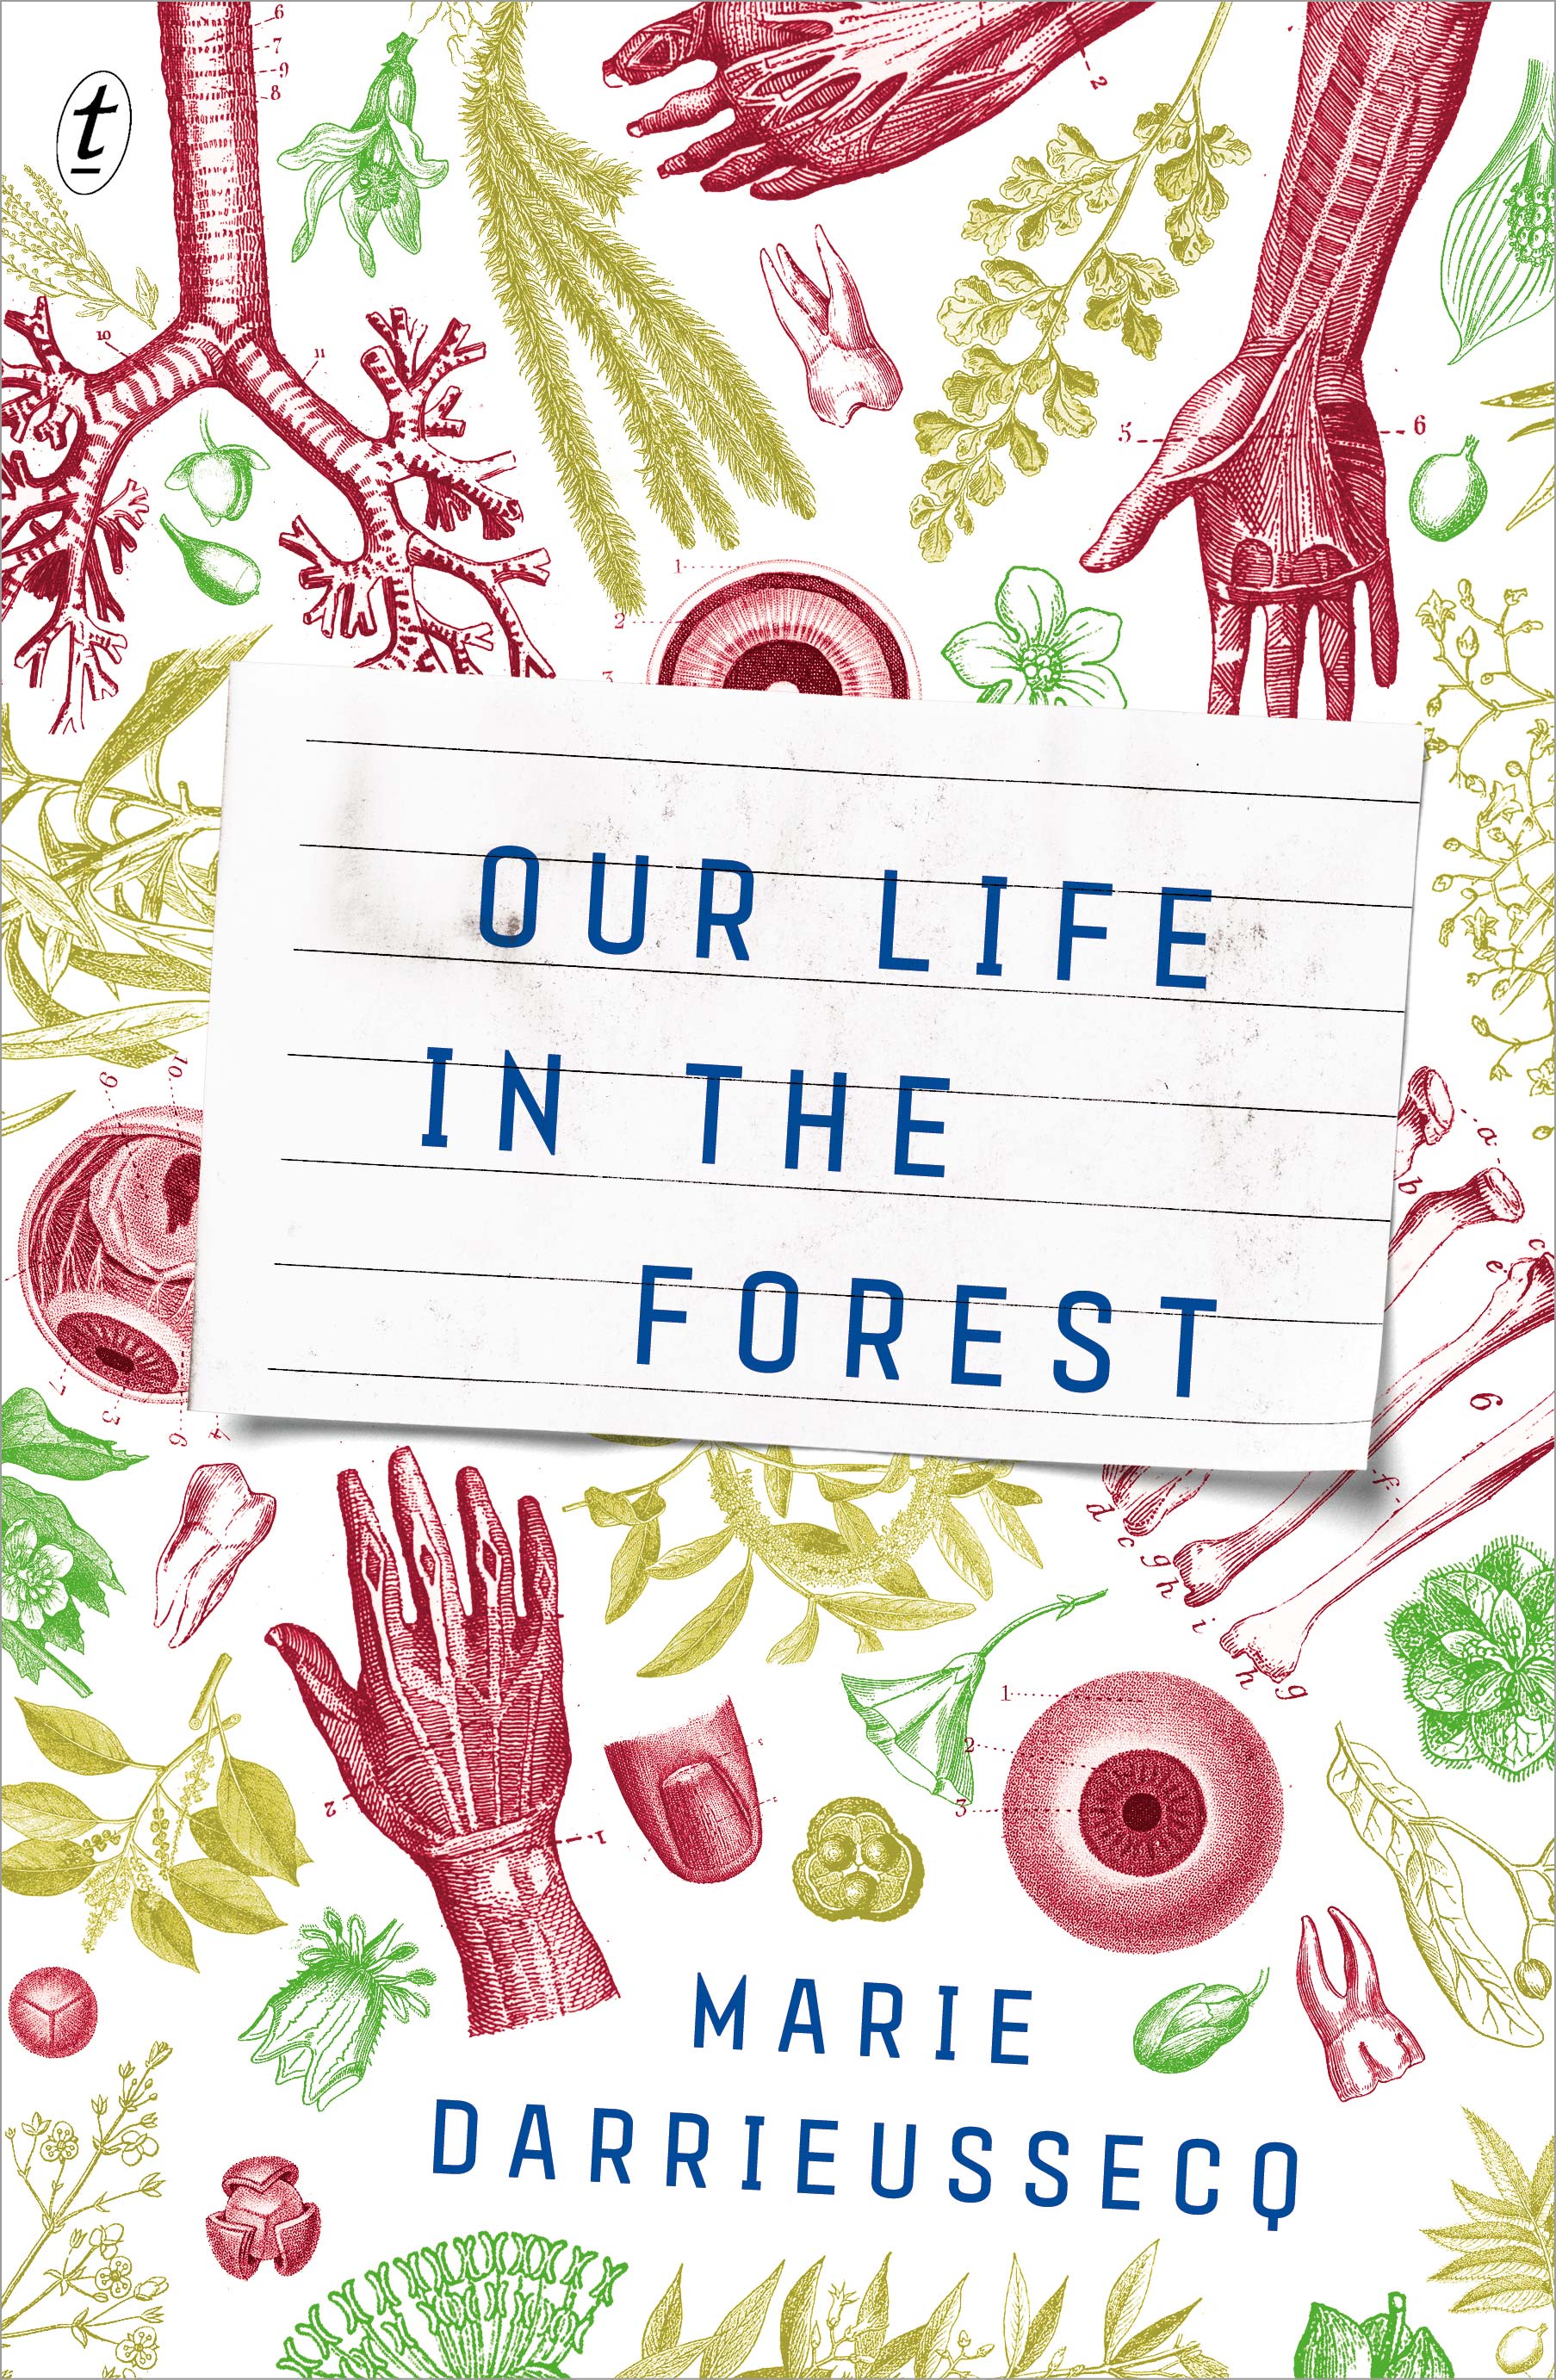 Our Life in the Forest by Marie Darrieussecq